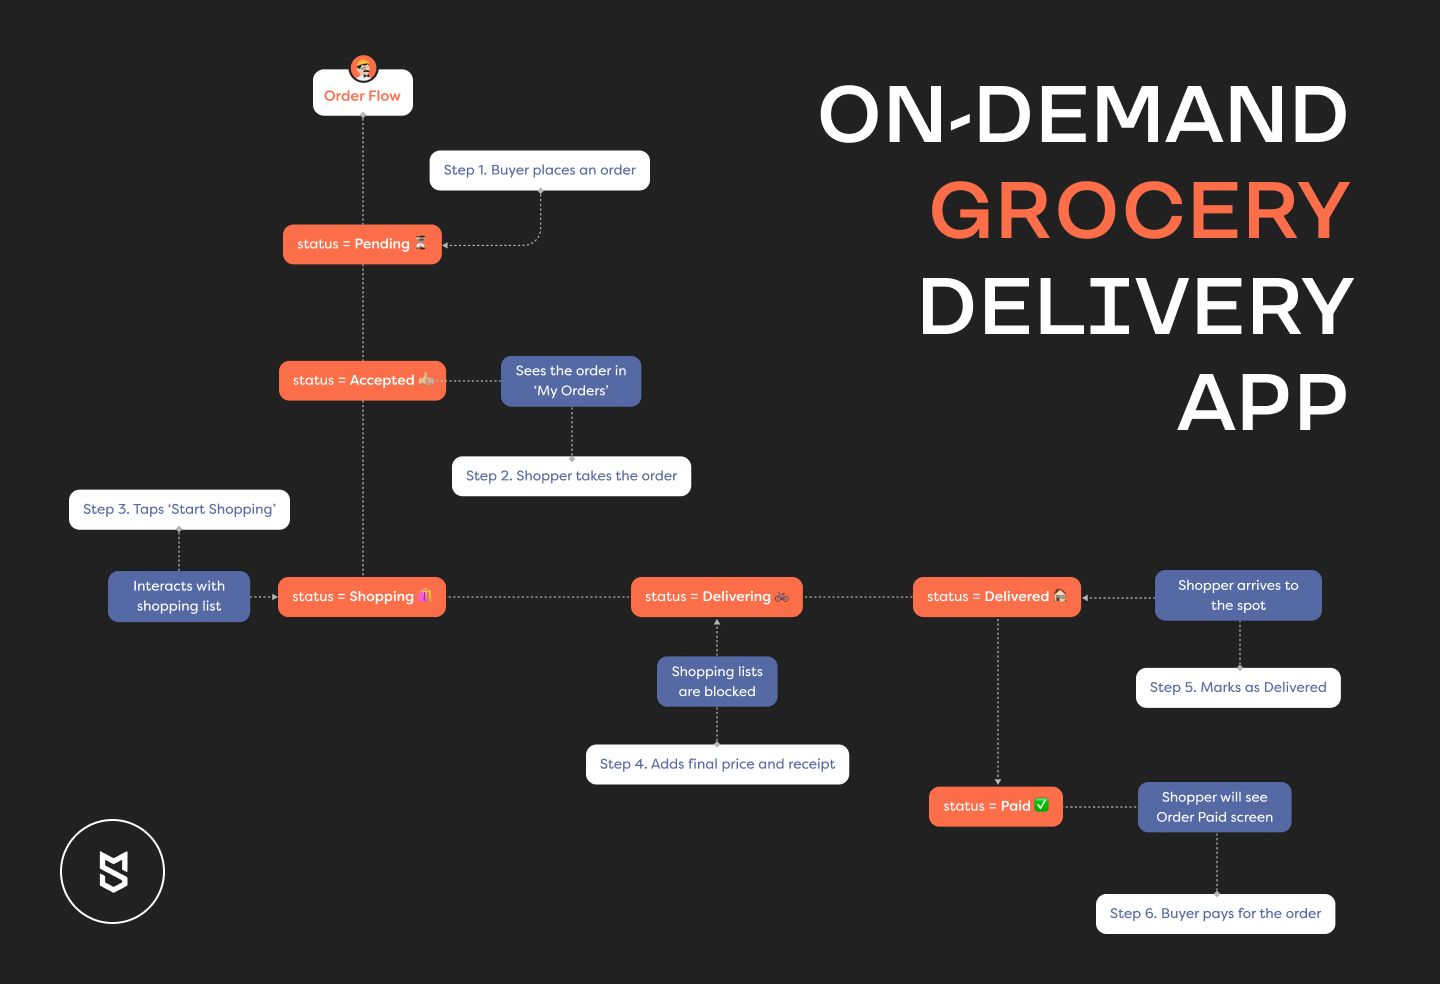 What is an on-demand grocery delivery app